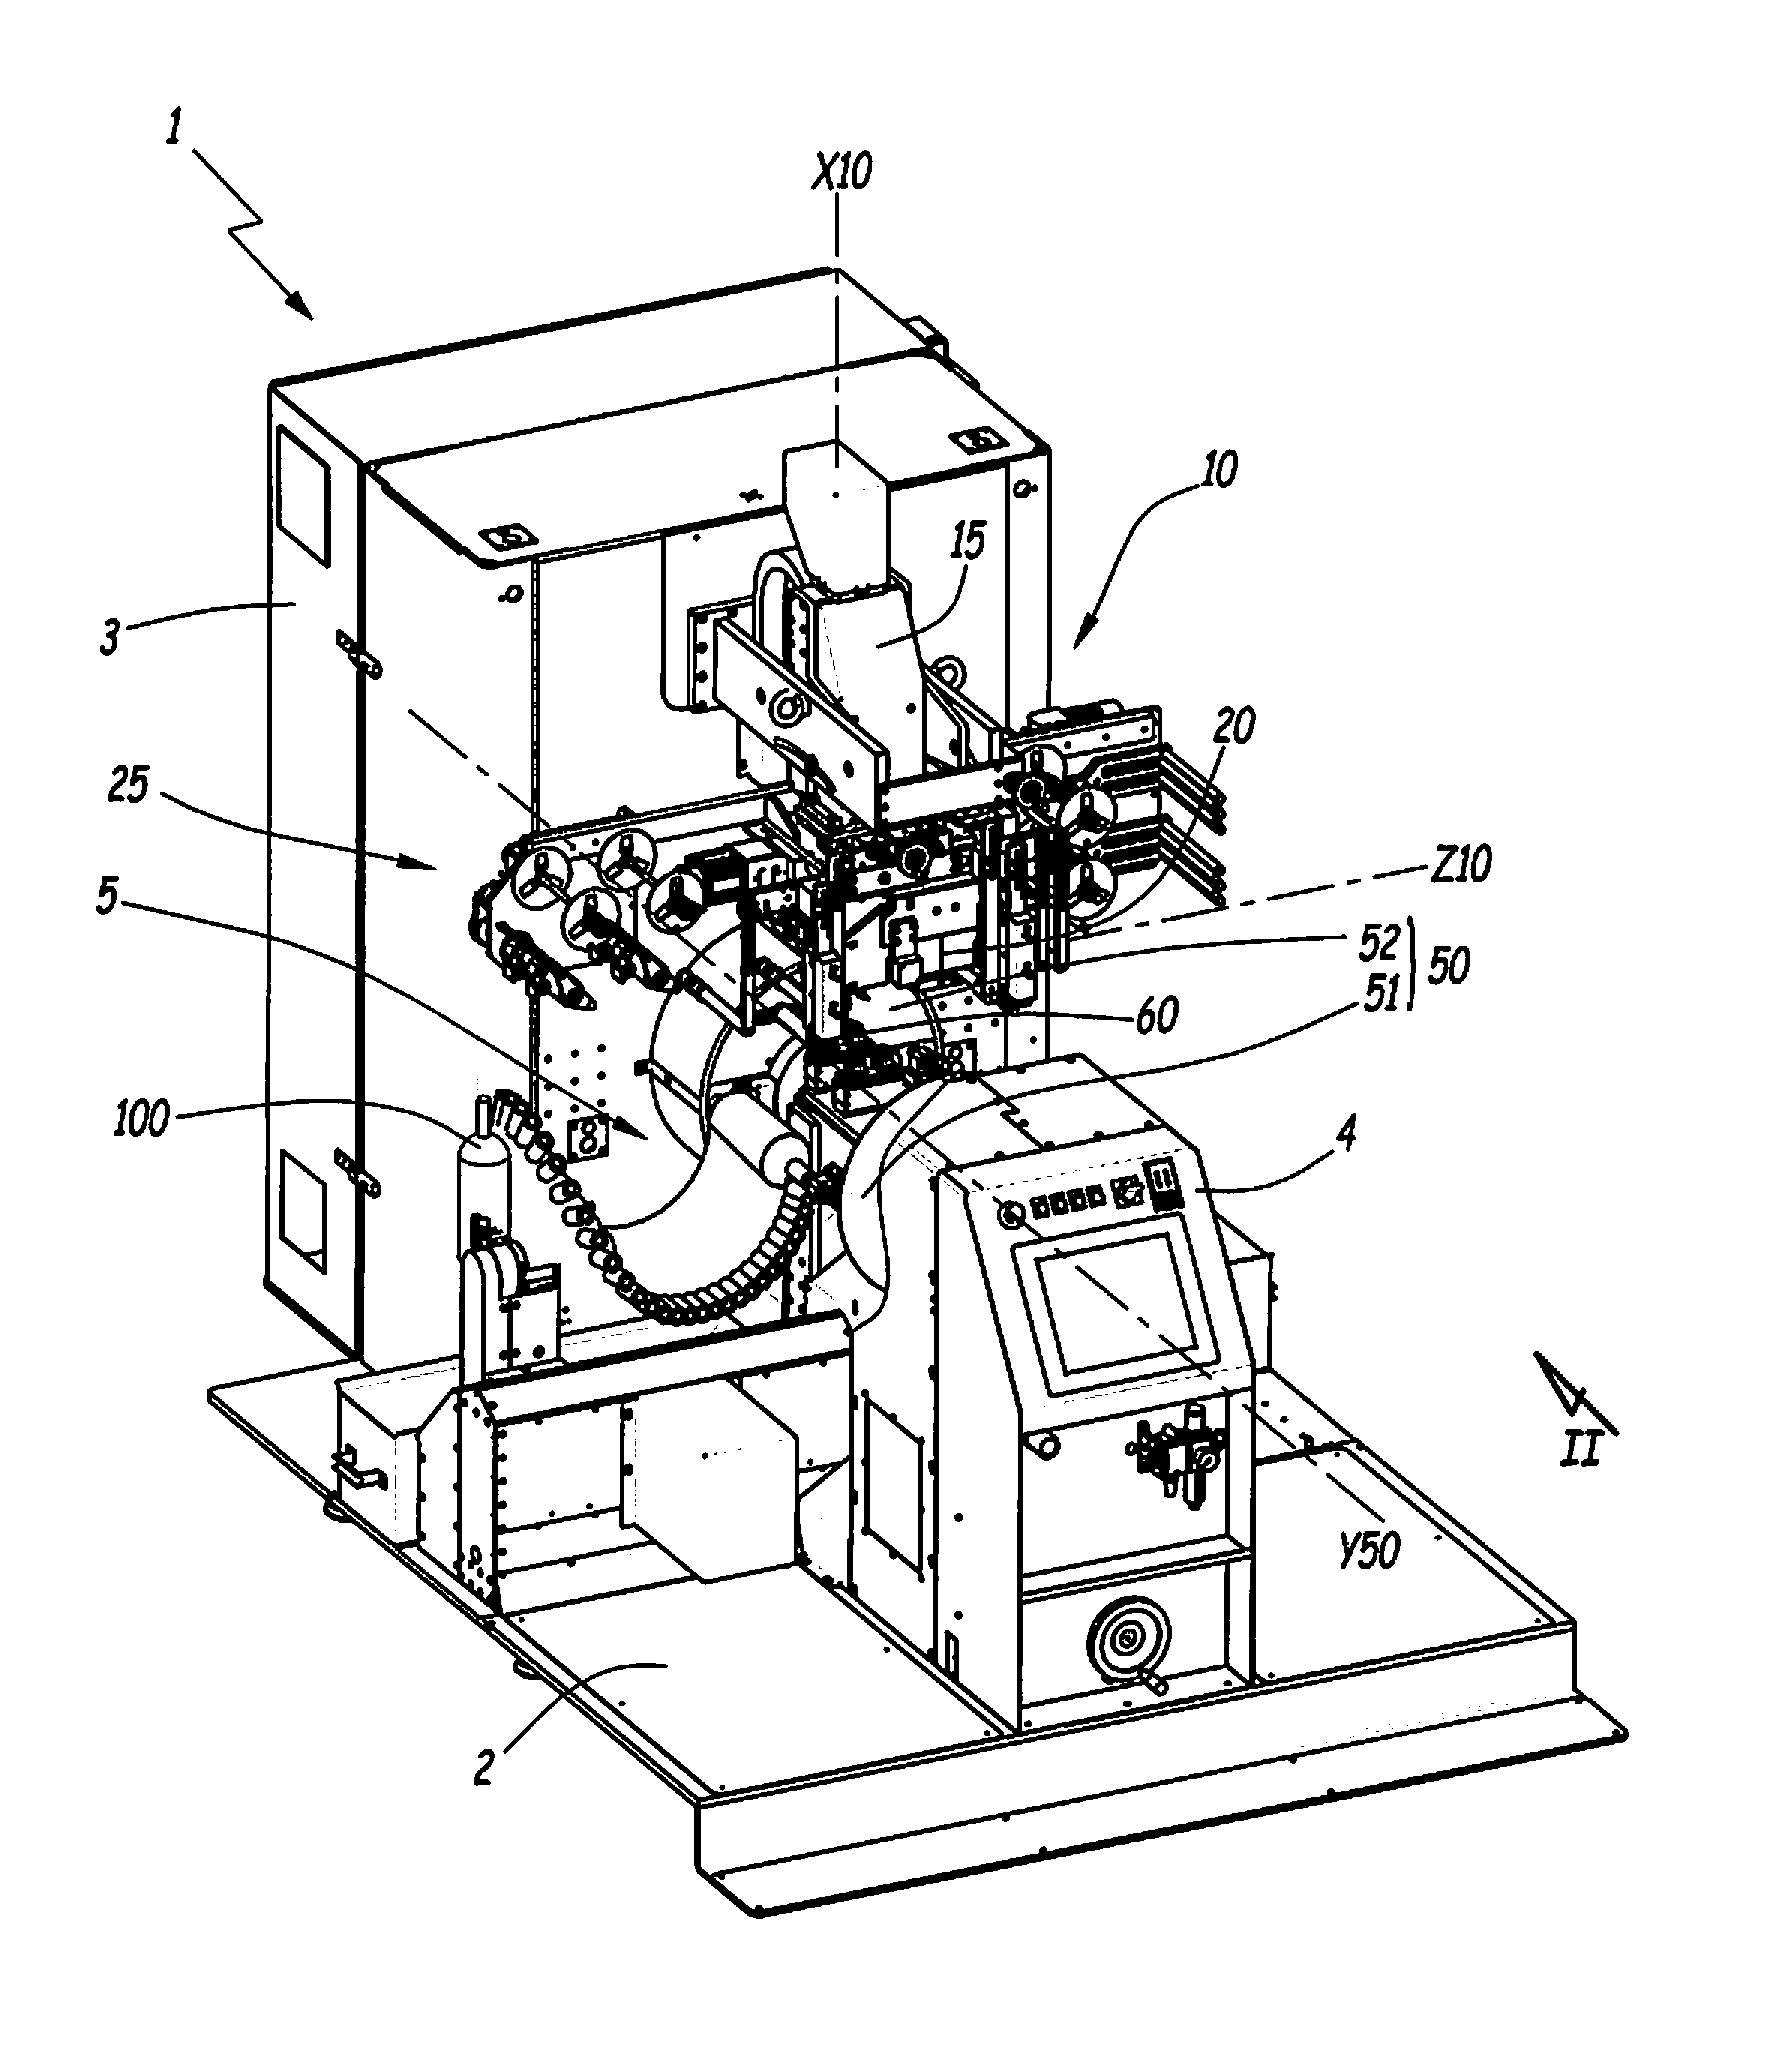 Machine and method for marking articles